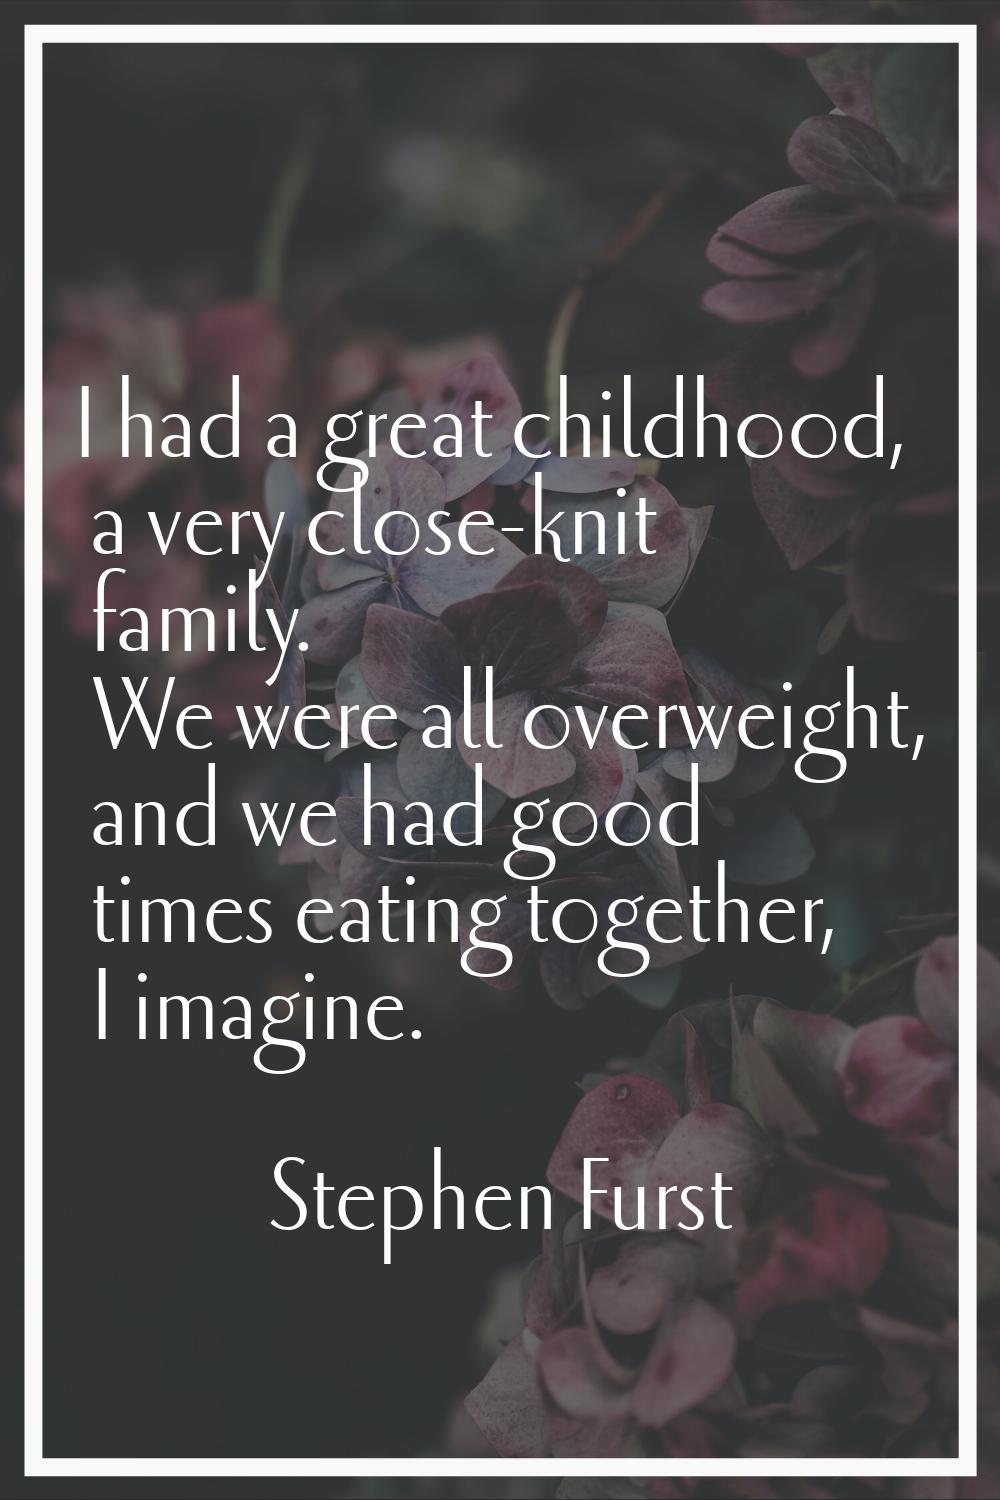 I had a great childhood, a very close-knit family. We were all overweight, and we had good times ea